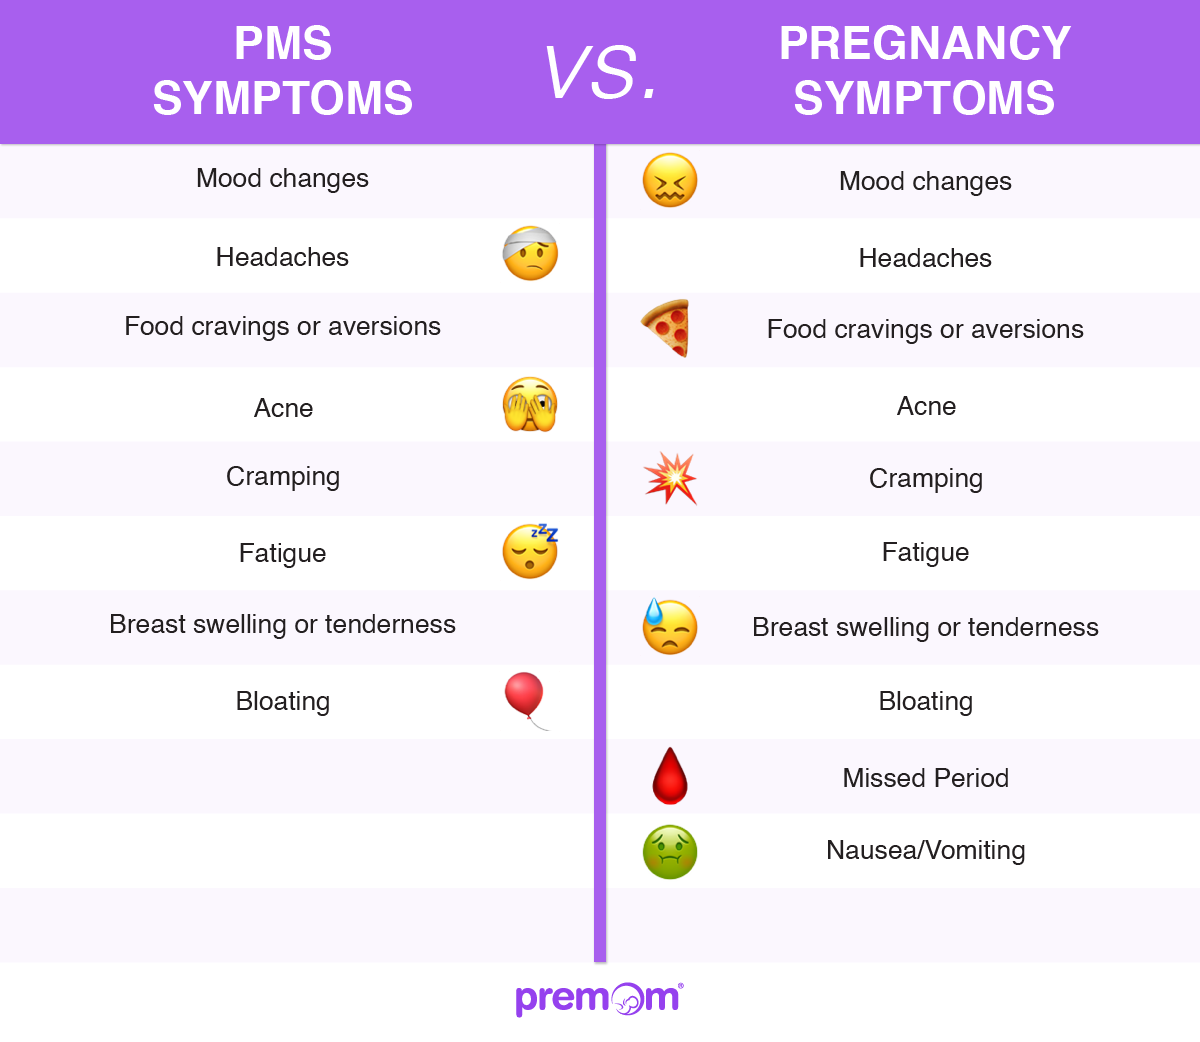 PMS (Premenstrual syndrome) Signs and treatment explained in 5